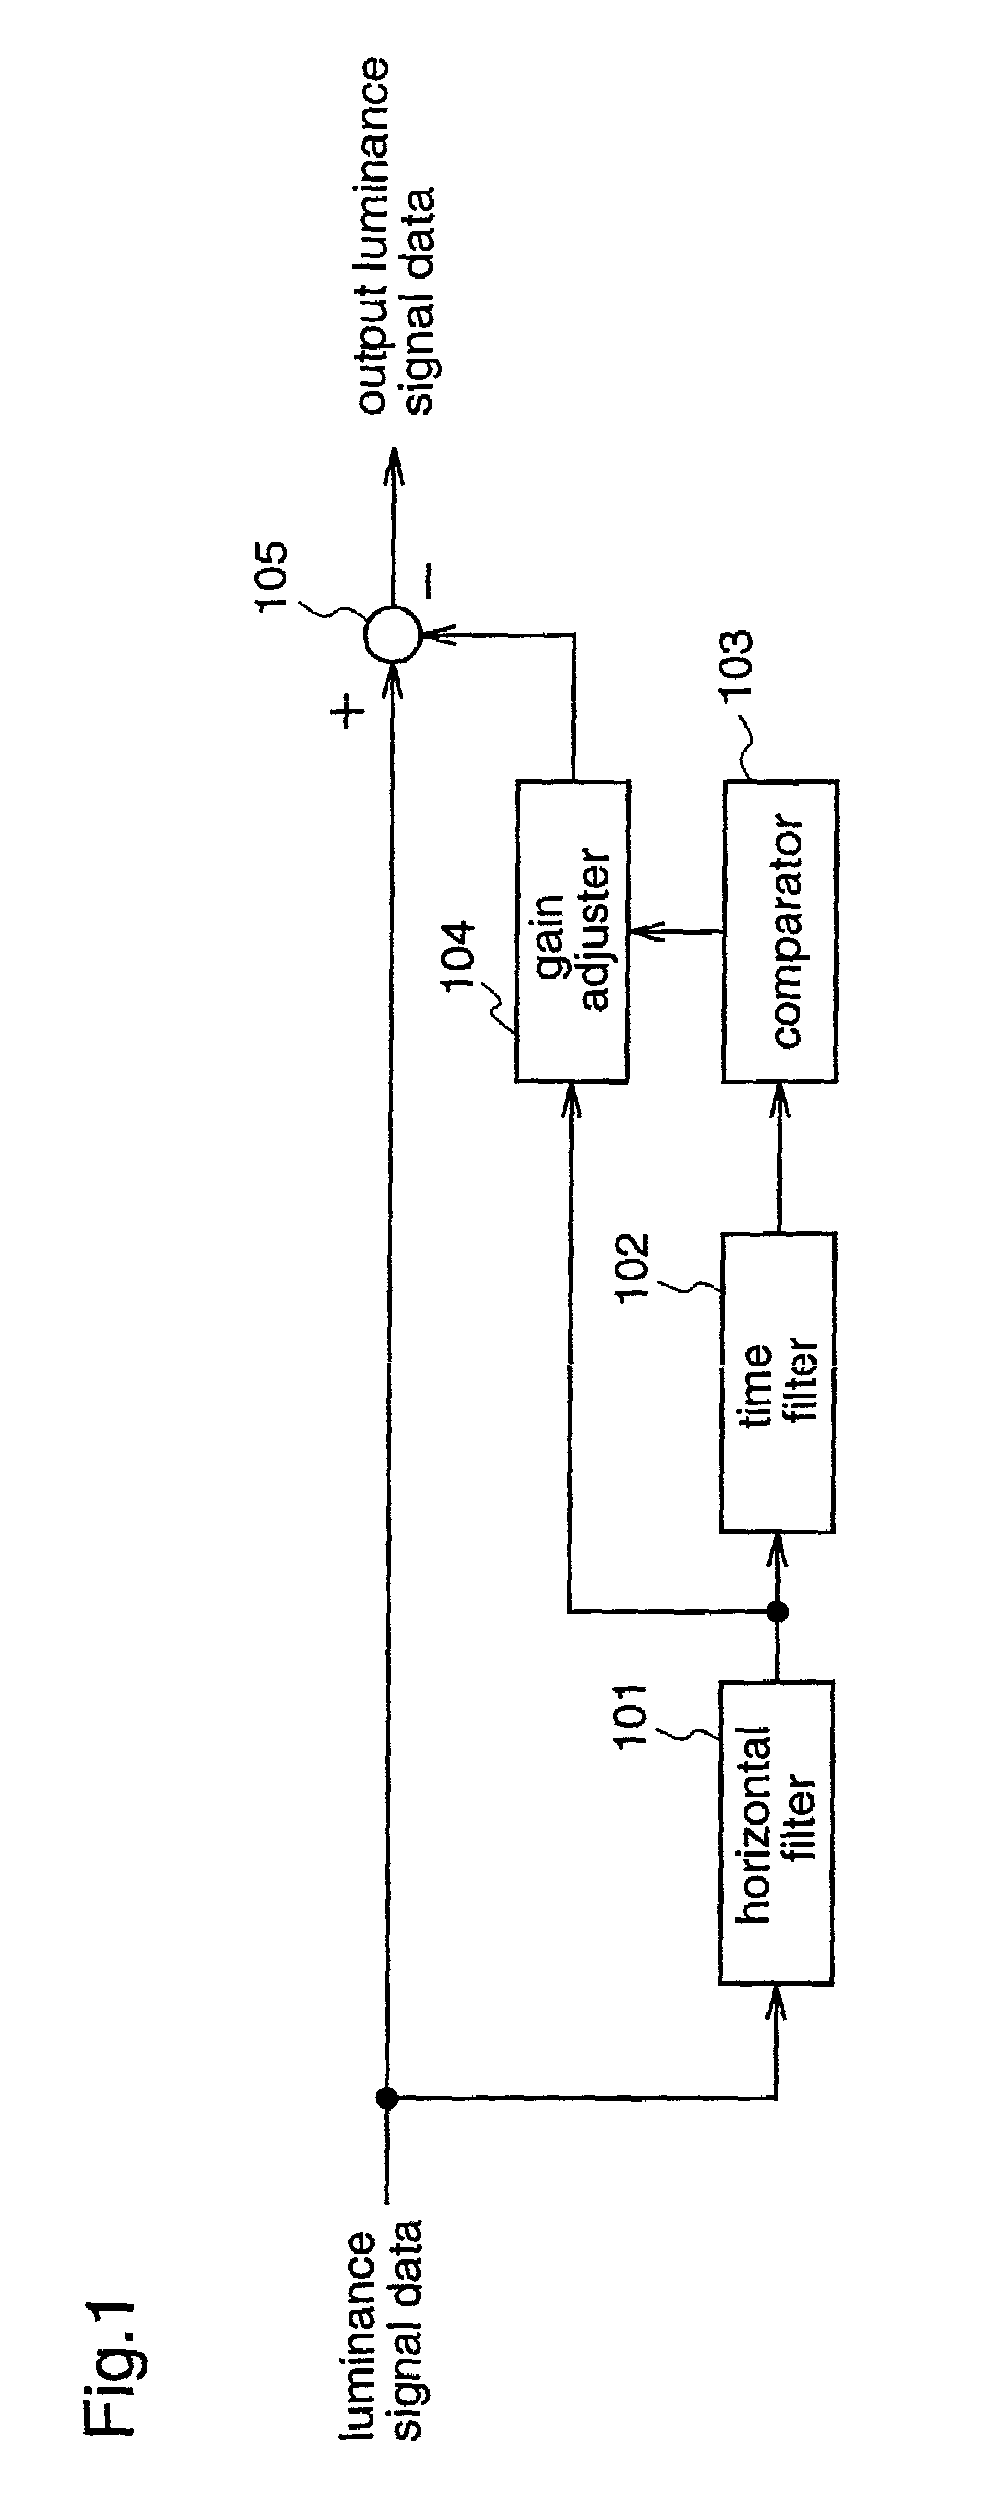 Video signal processing method and apparatus